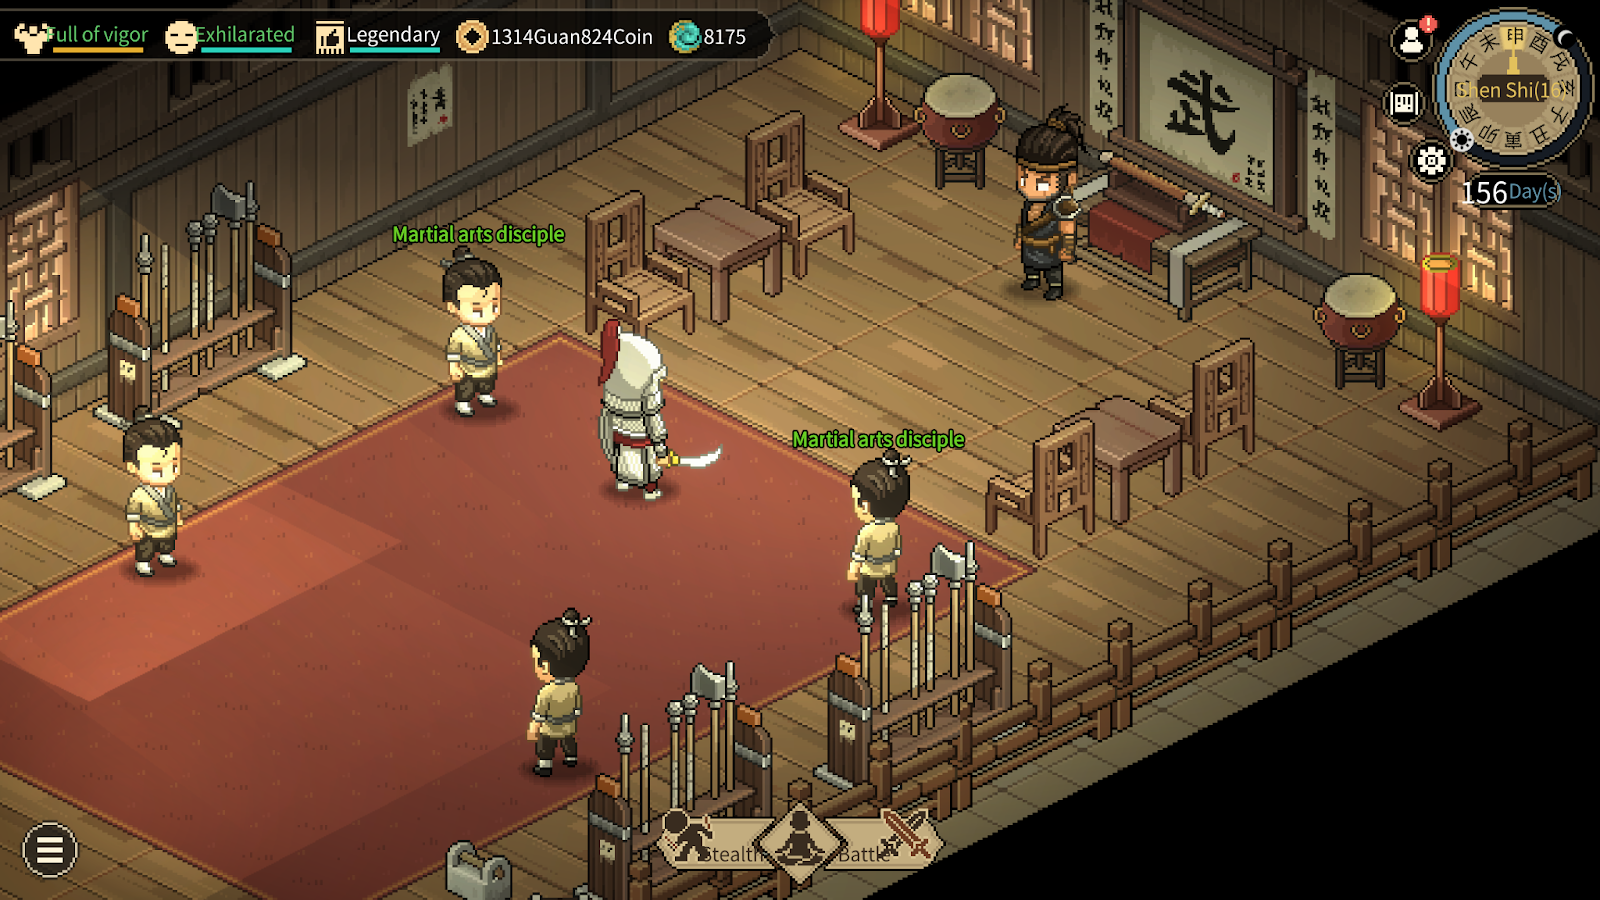 Pixel-art martial artists in tactical RPG Hero's Adventure: Road to Passion